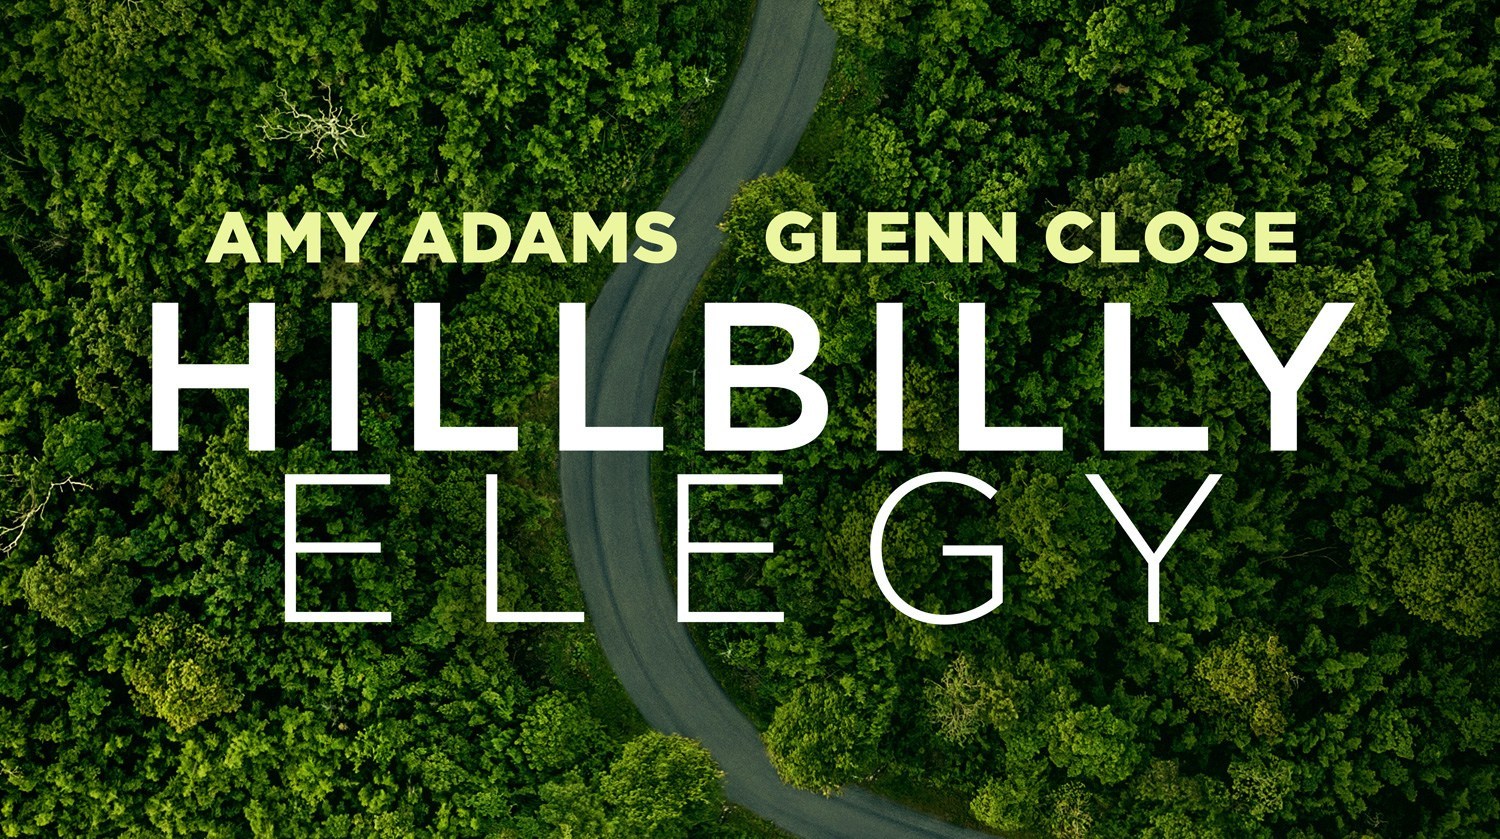 “Hillbilly Elegy” with Lucy Capri in Select Theaters, Updated Tour Schedules for WAITRESS and CHARLIE AND THE CHOCOLATE FACTORY, and more!